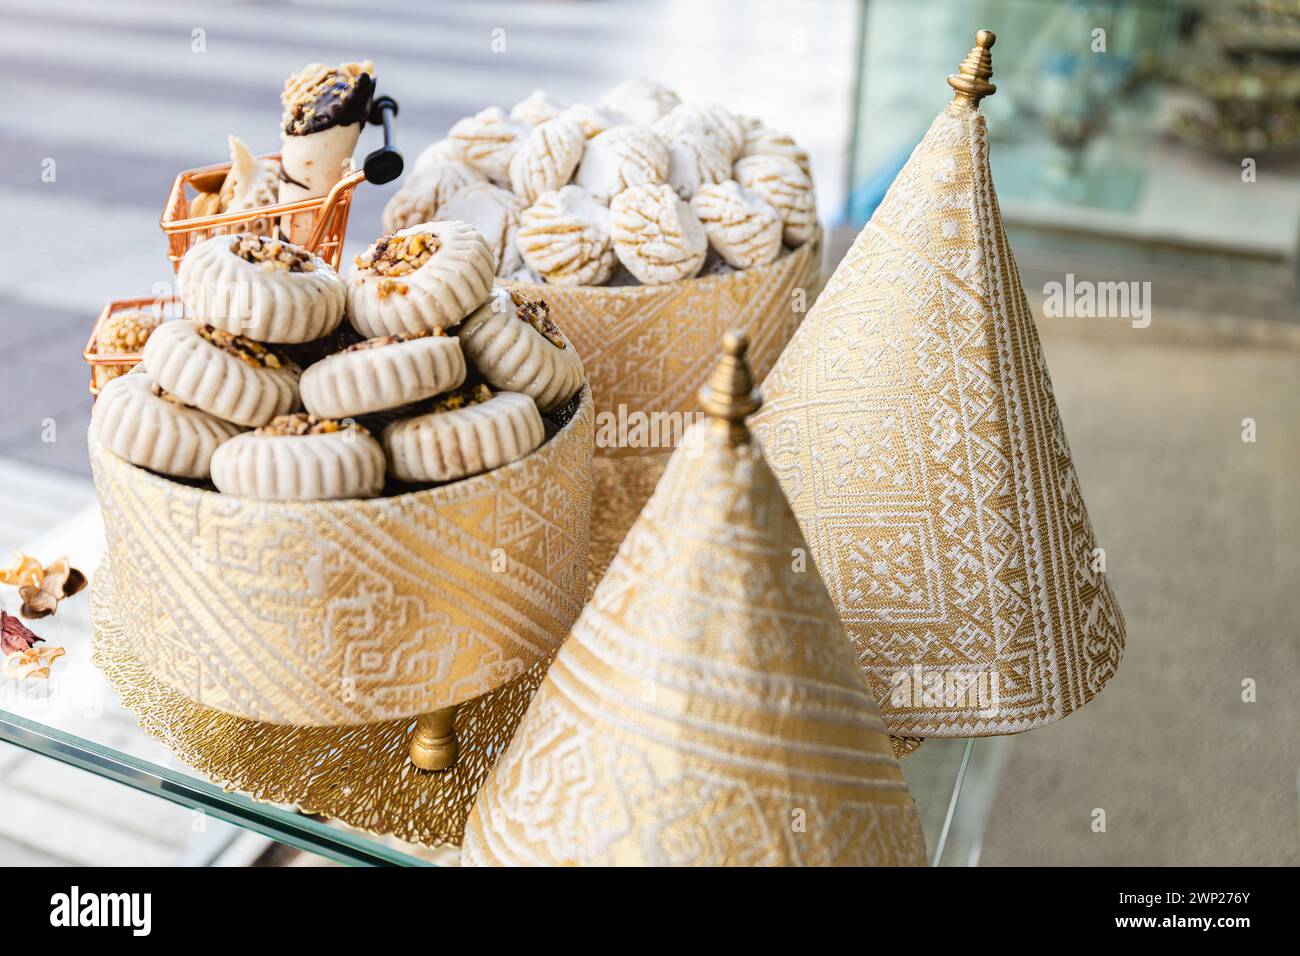 Horizontal photo a visually engaging assortment of Arabic sweets on golden stands, with ornate geometric fabric covers adding cultural richness. Food Stock Photo